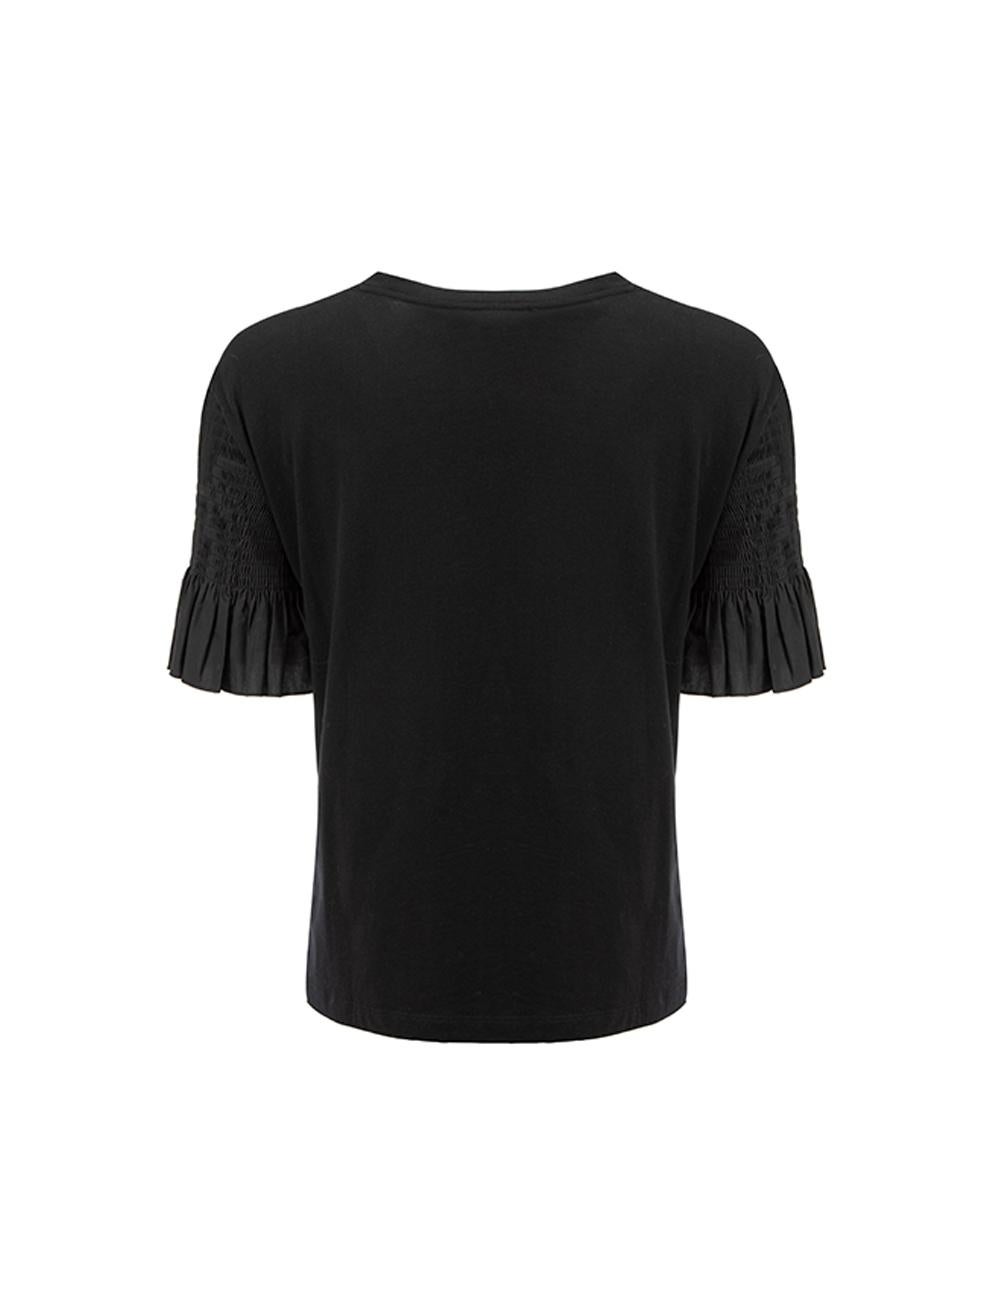 Black Loose Fit Shirring Detail T-shirt Size S In Good Condition For Sale In London, GB